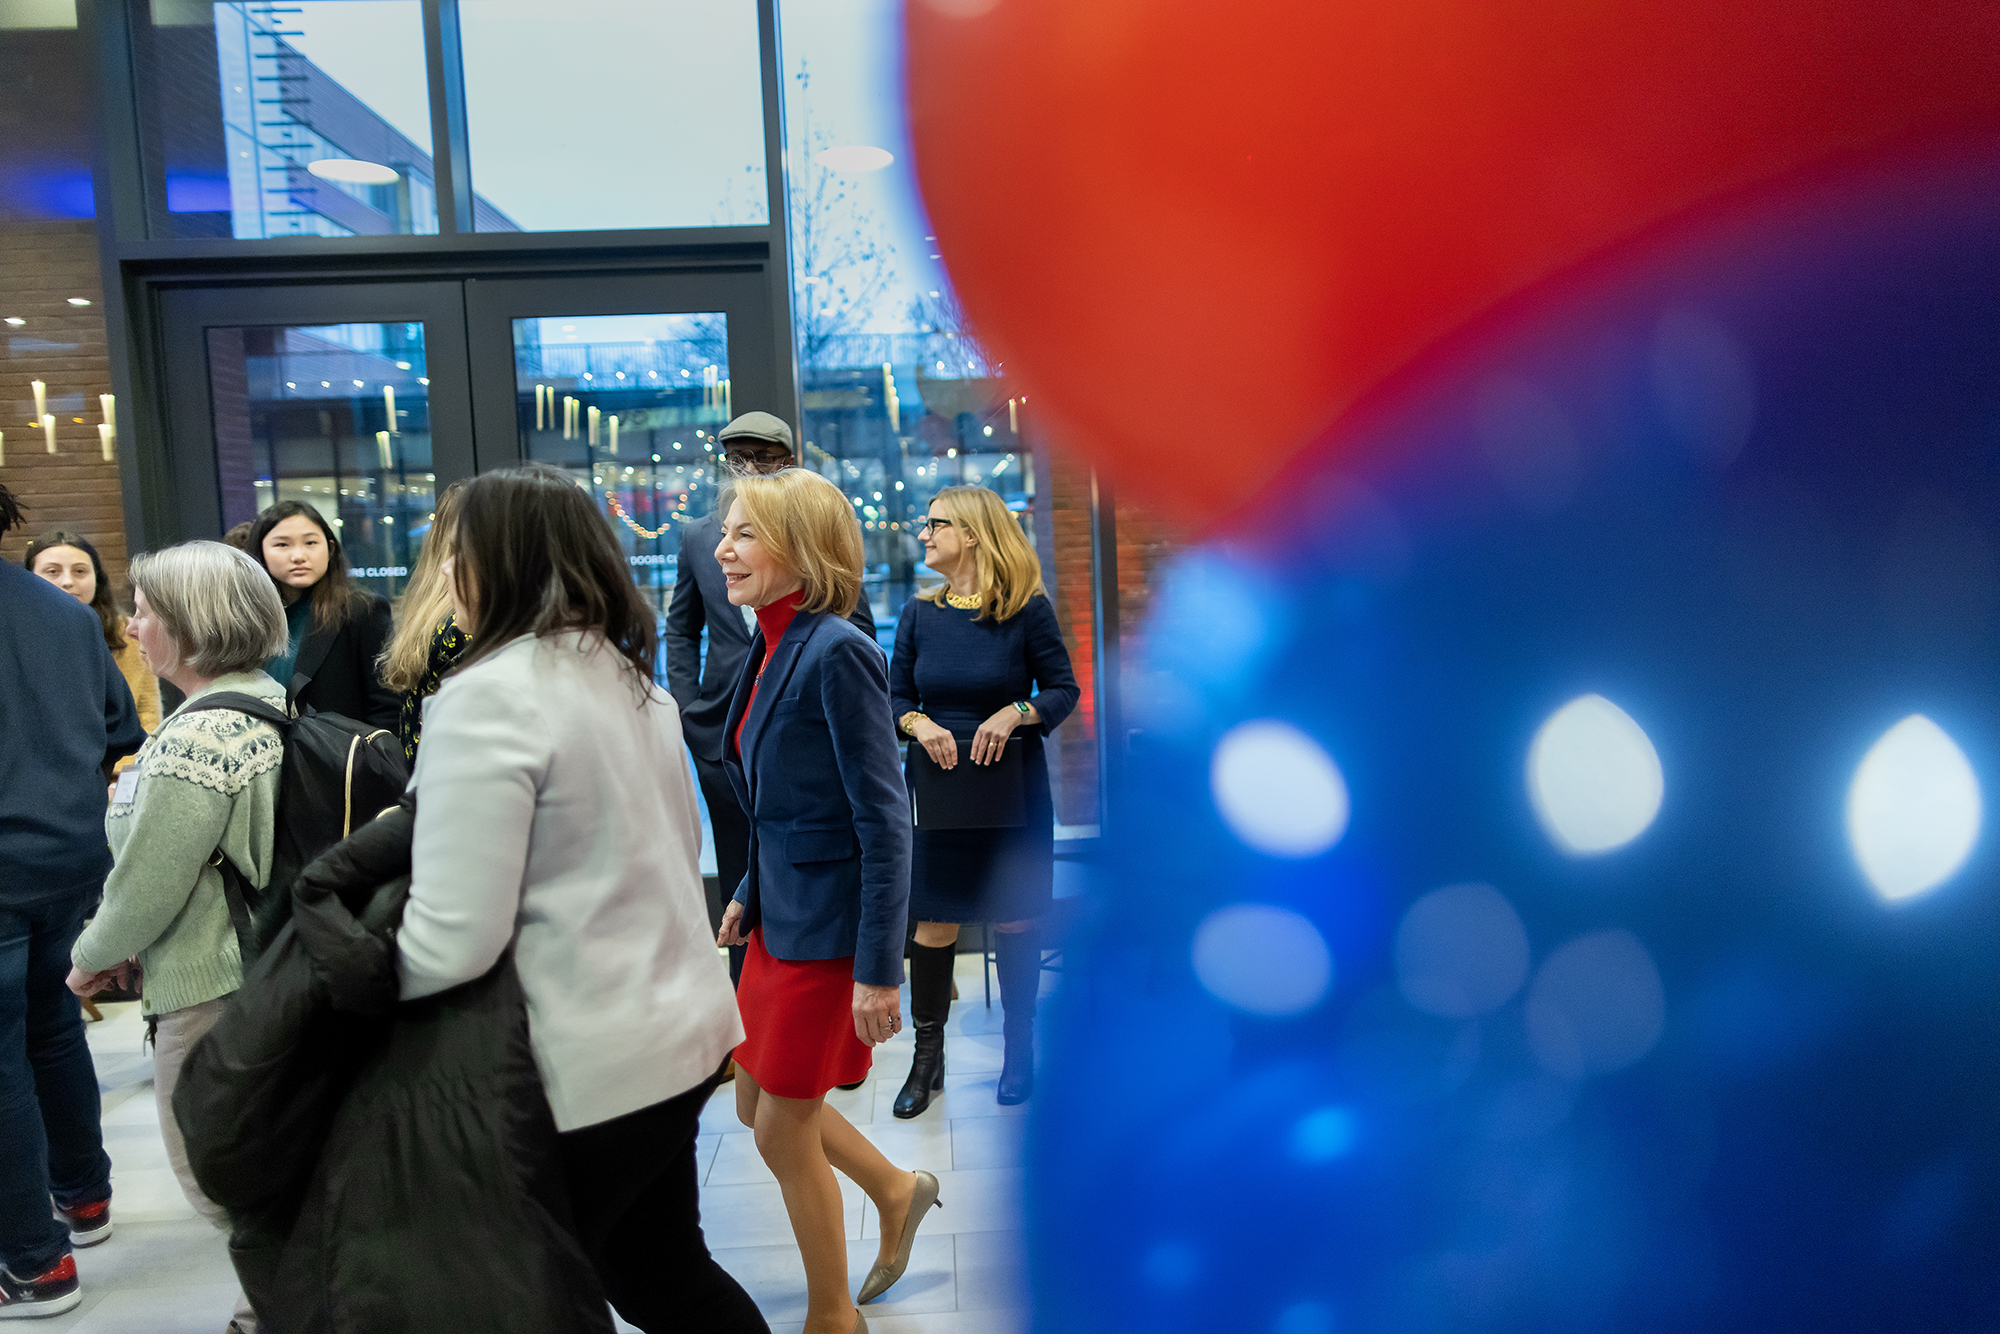 Gutmann with red and blue balloons